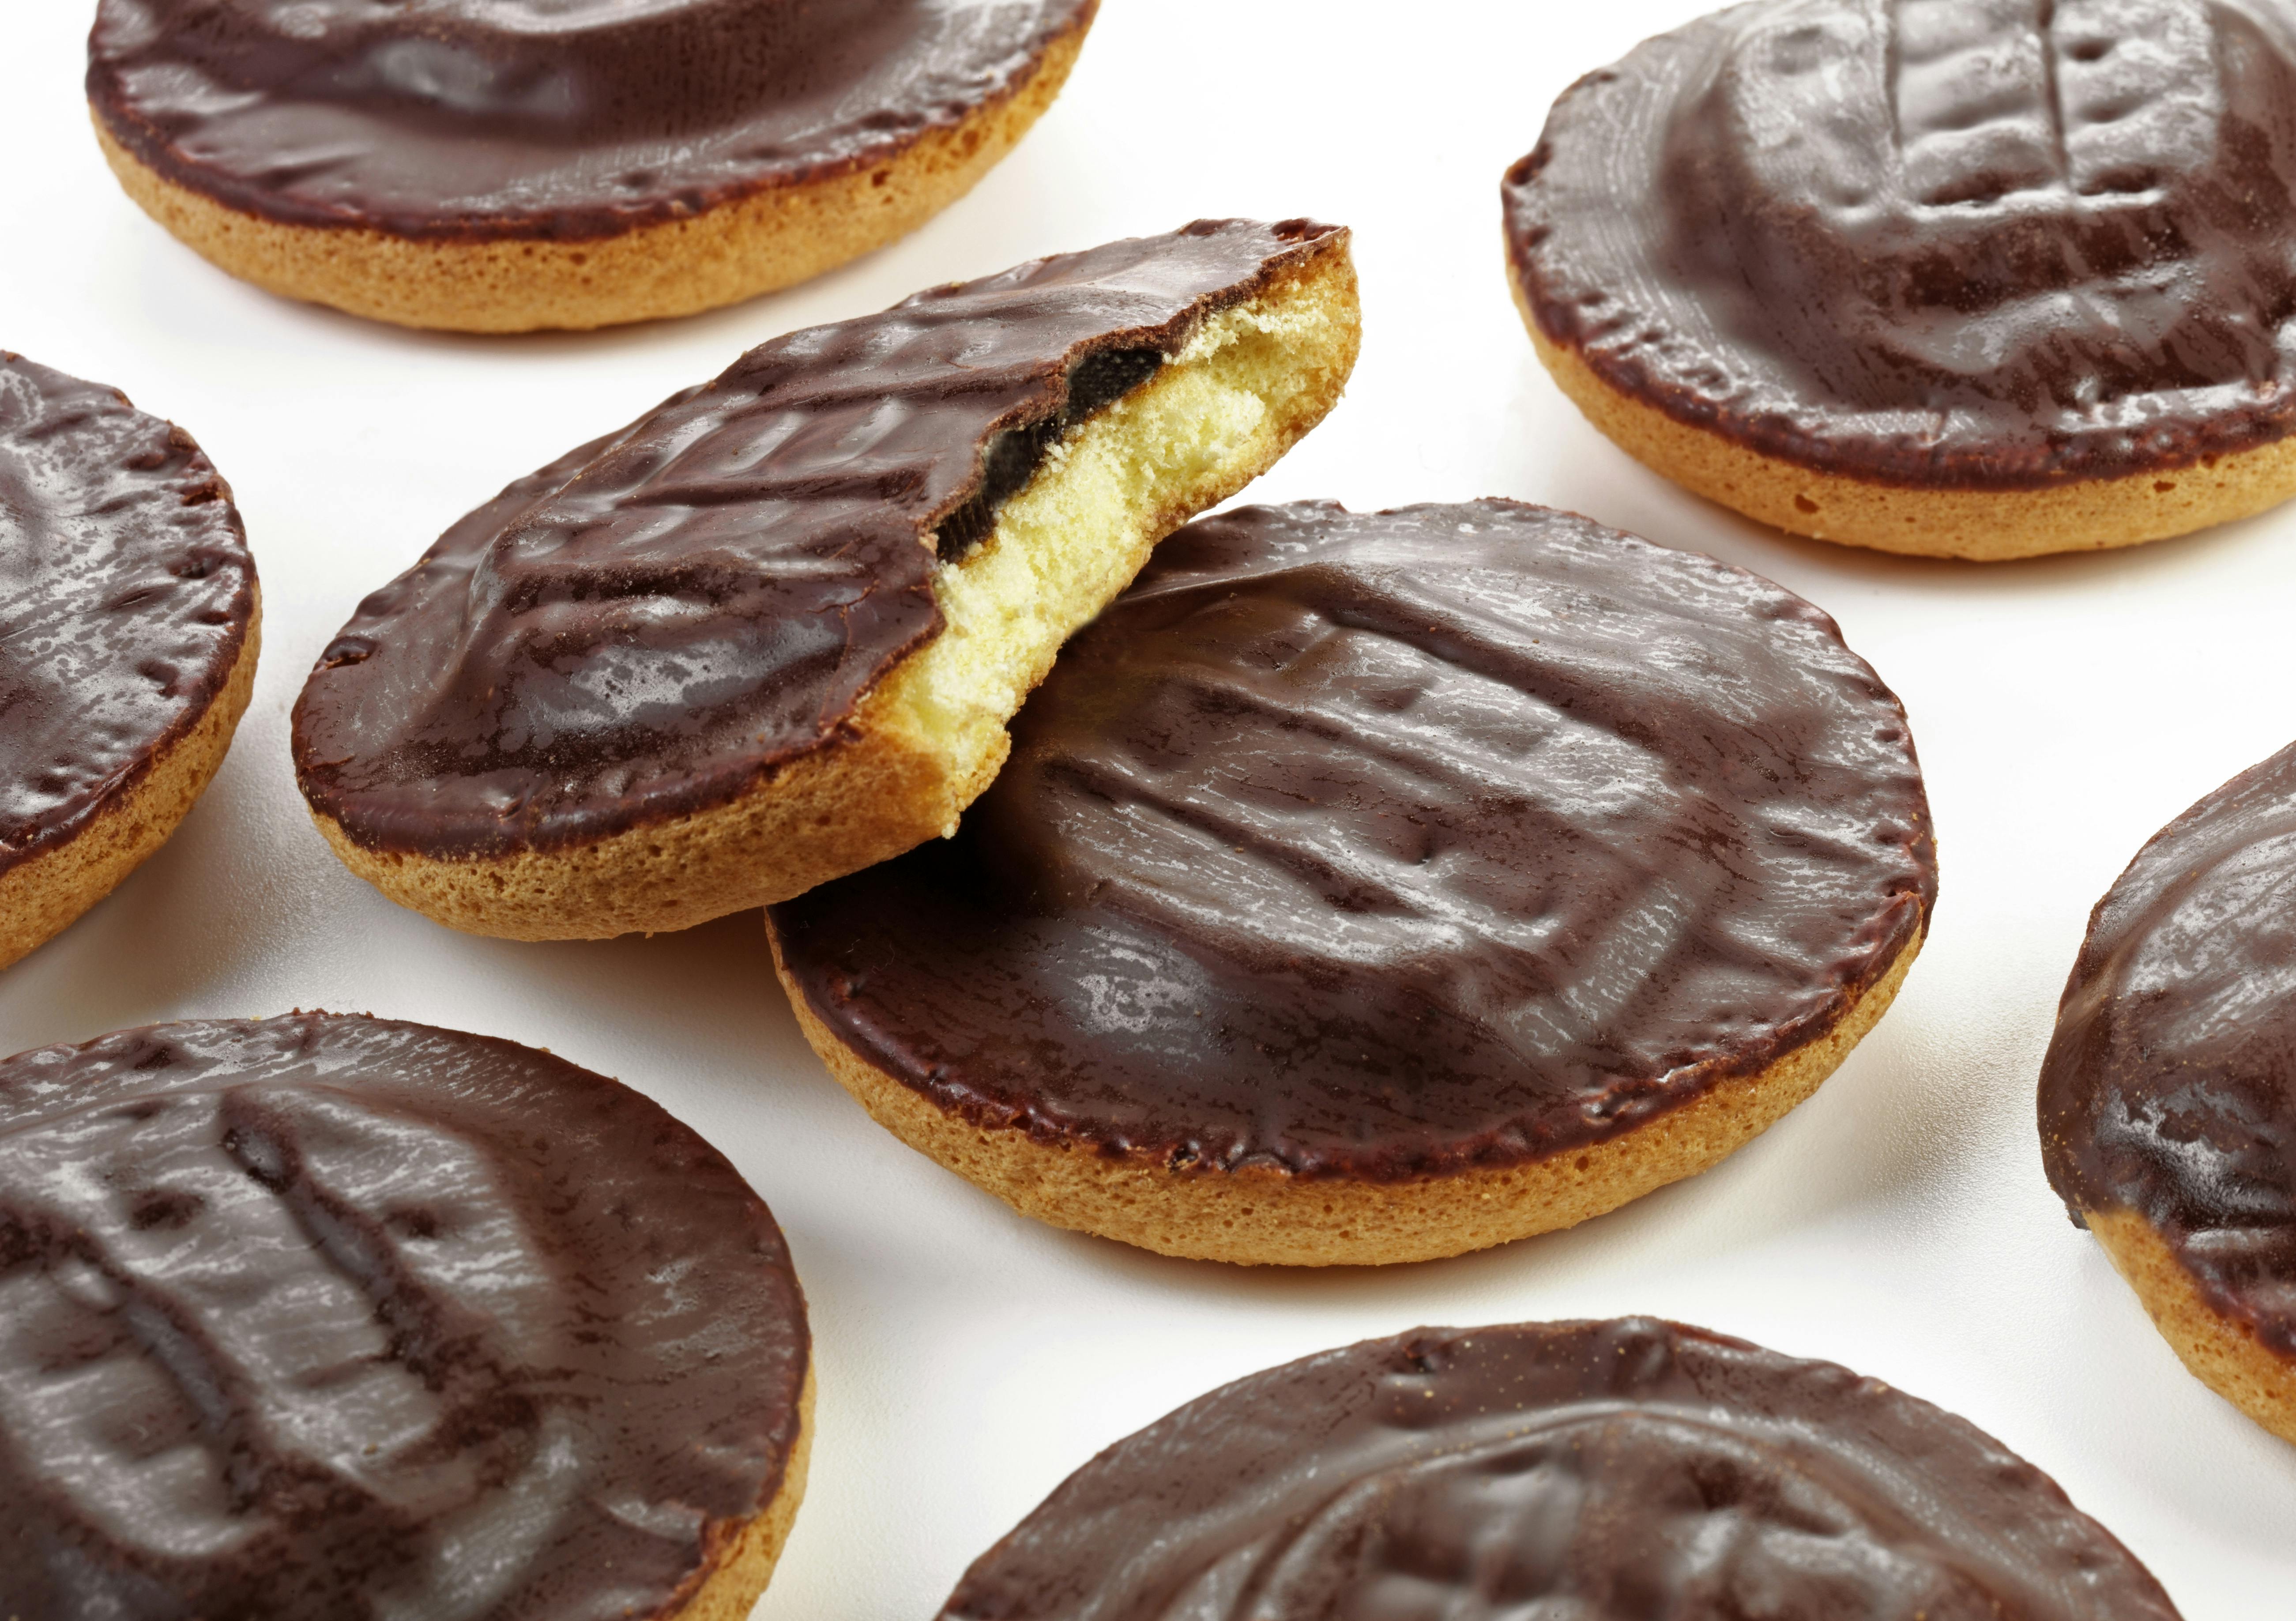 Jaffa cakes boxes shrink in latest chocolate downsizing scandal... but some  stores sell them for same price | London Evening Standard | Evening Standard